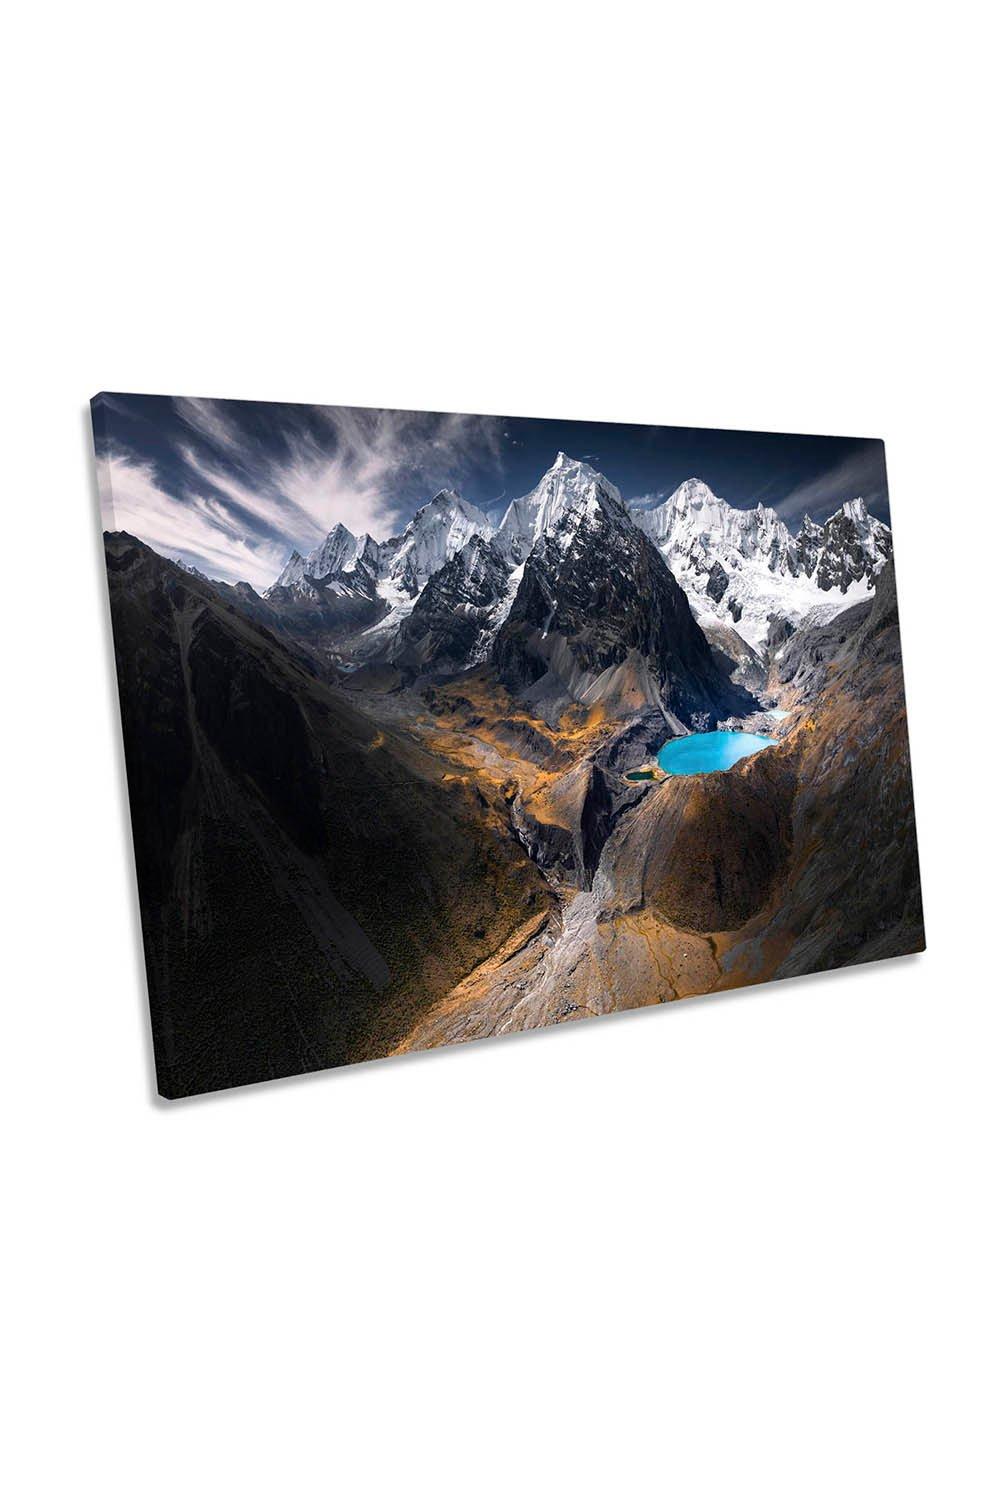 Andes Mountains Peru Landscape Lake Canvas Wall Art Picture Print